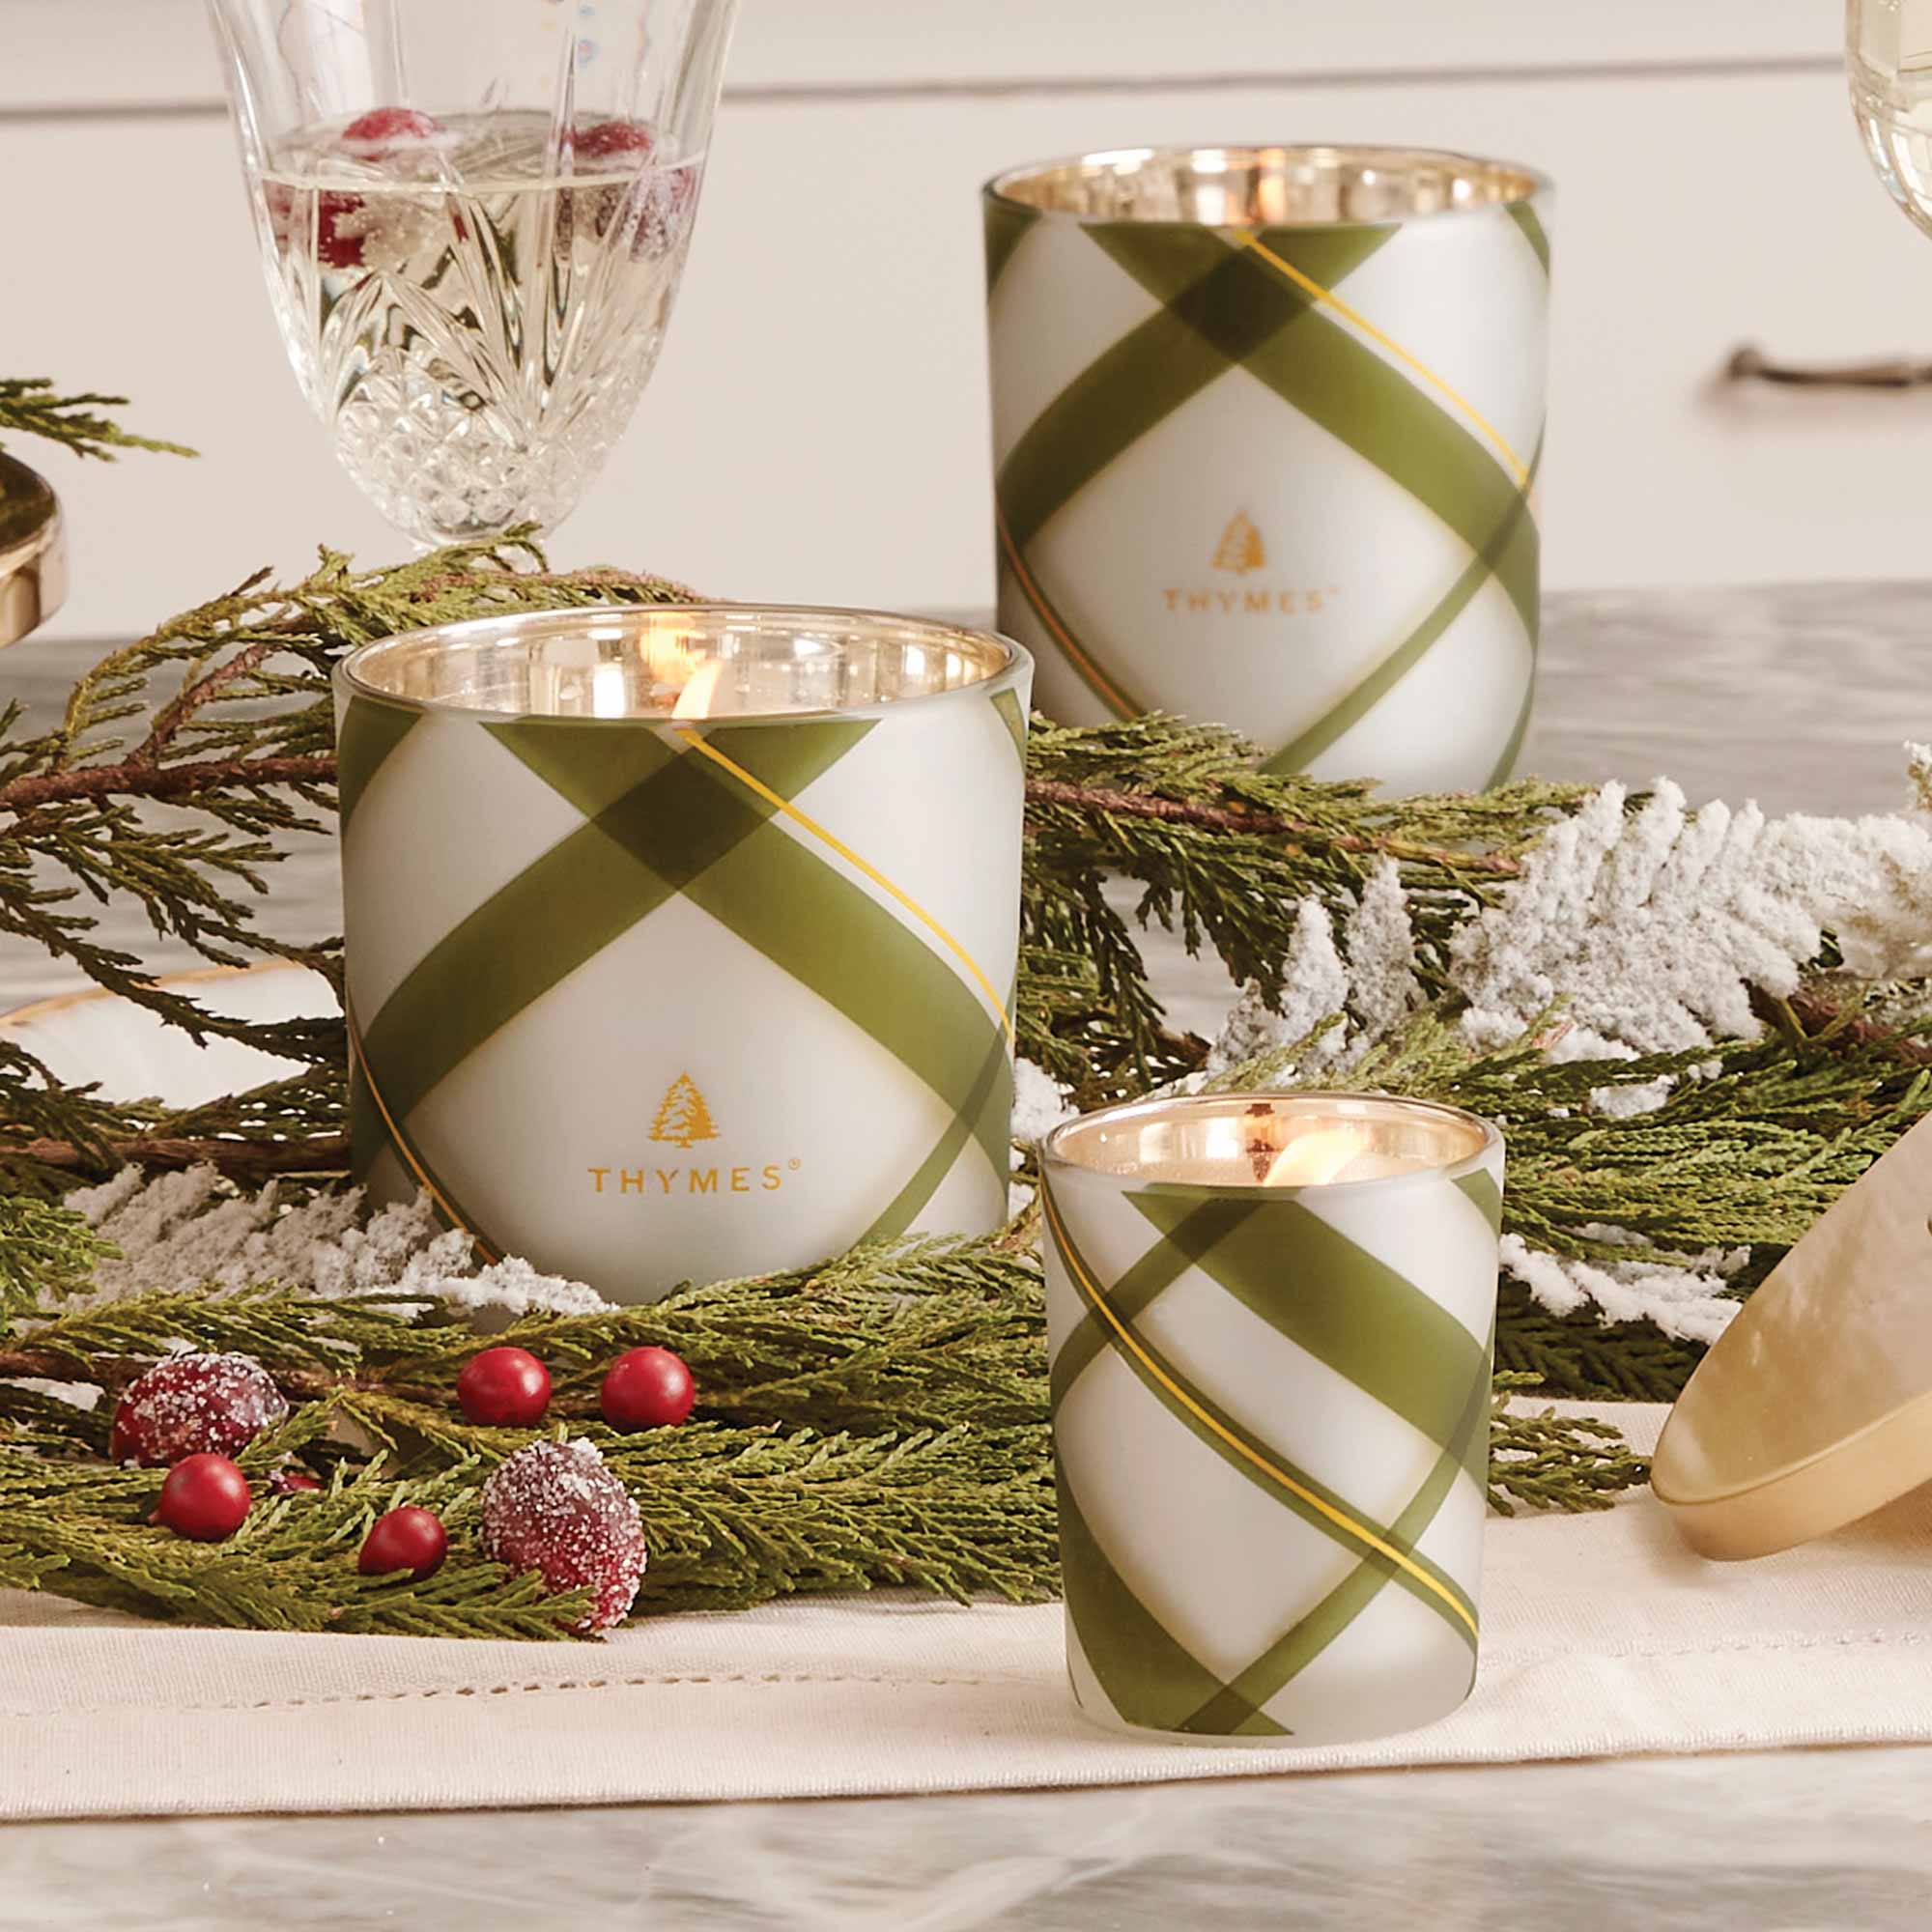 Frasier Fir Candle  Plaid – Wrapped Gift Boutique